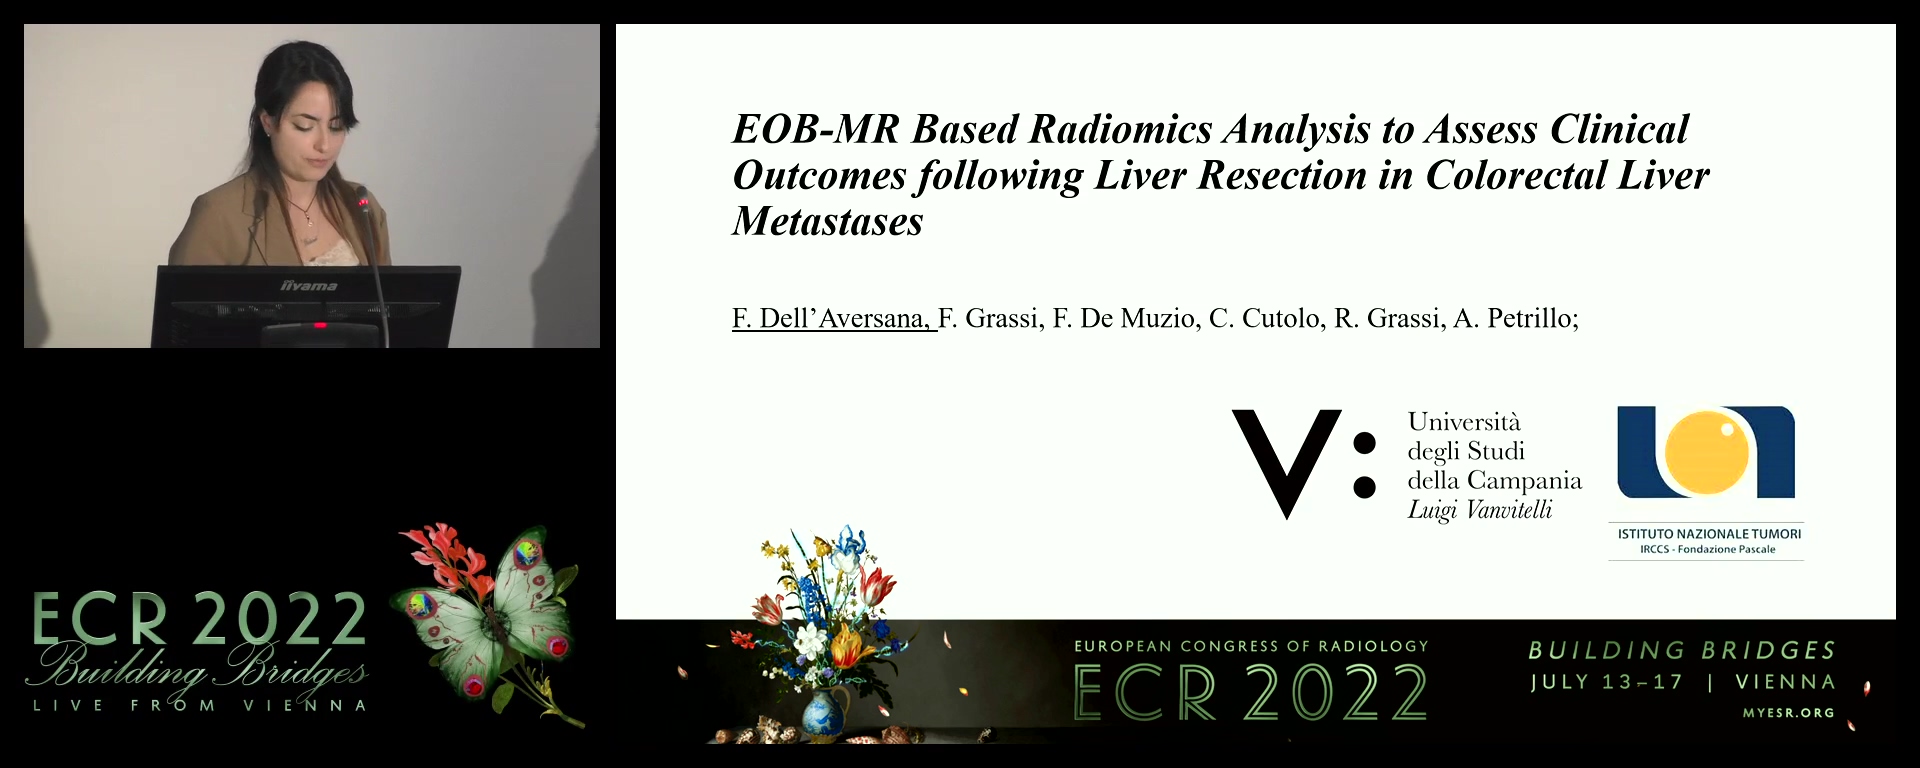 EOB-MR based radiomics analysis to assess clinical outcomes following liver resection in colorectal liver metastases